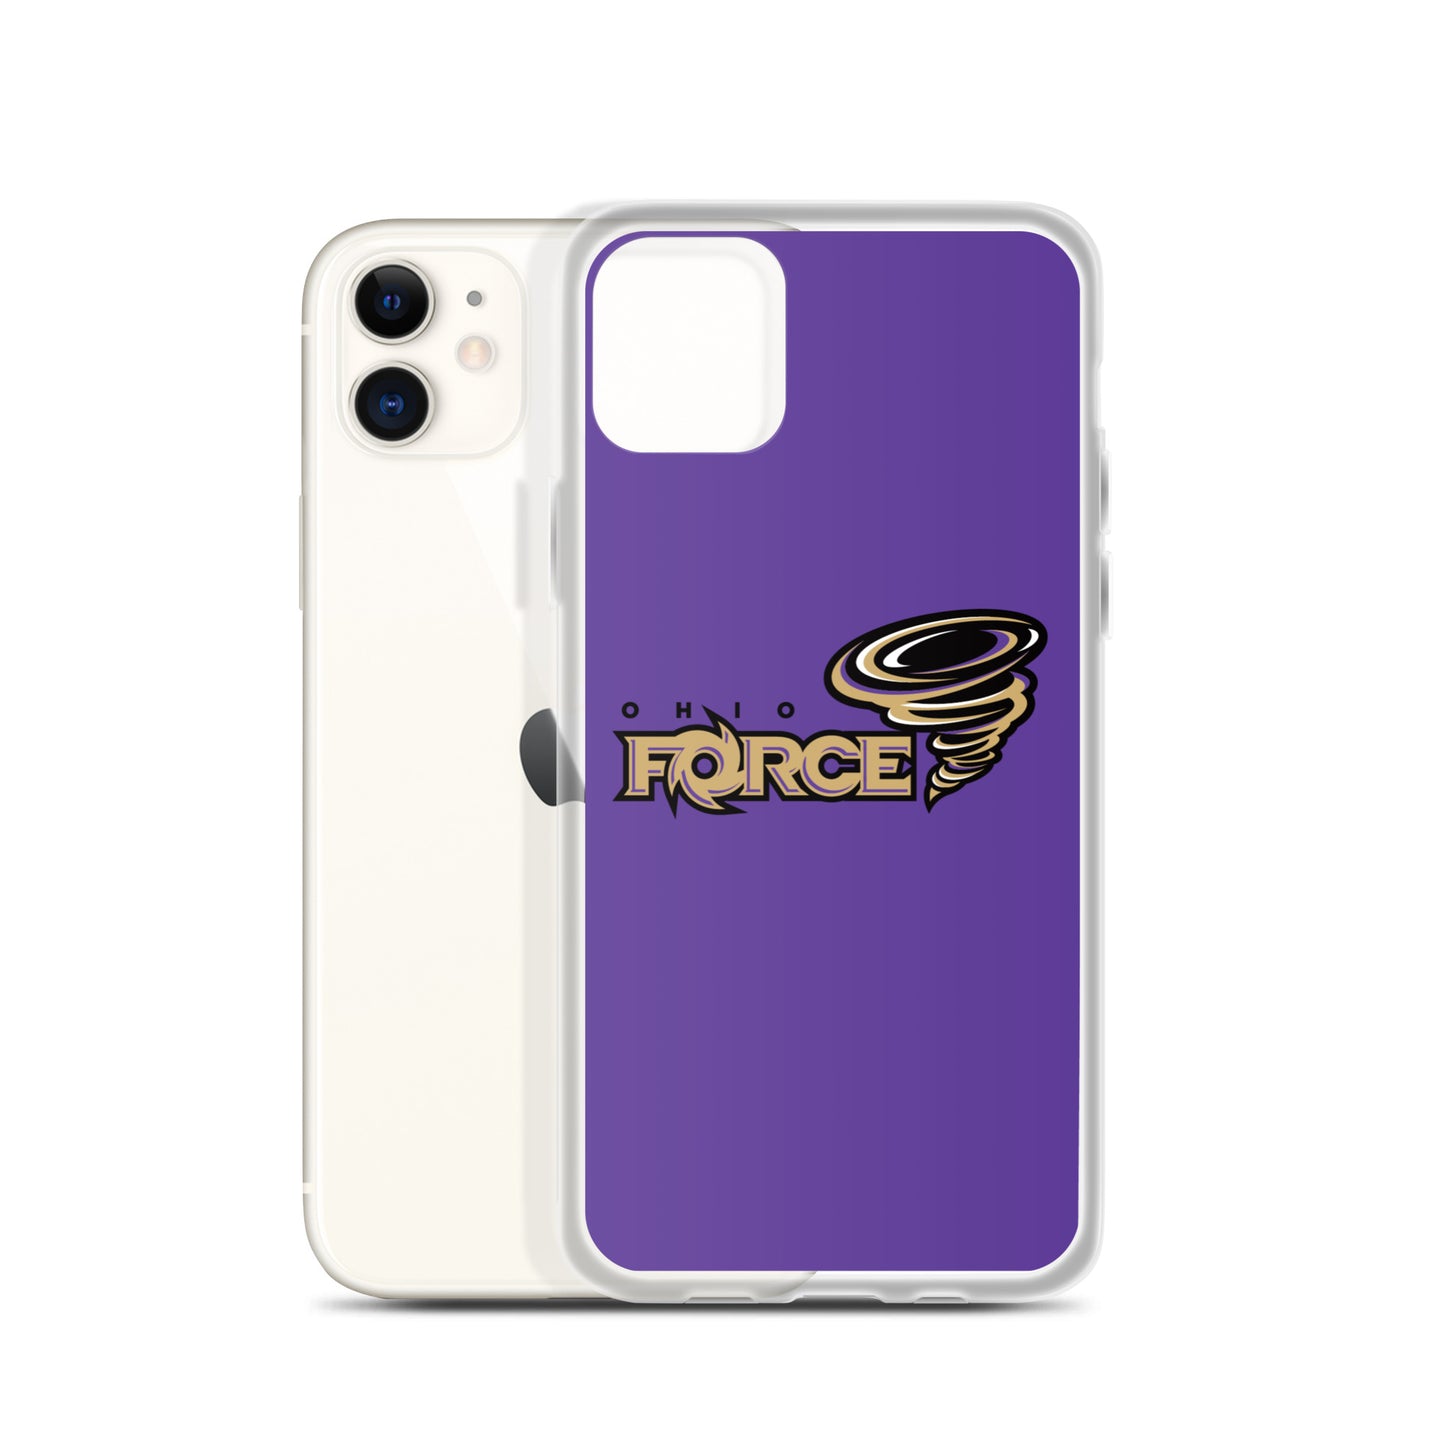 Force iPhone Case